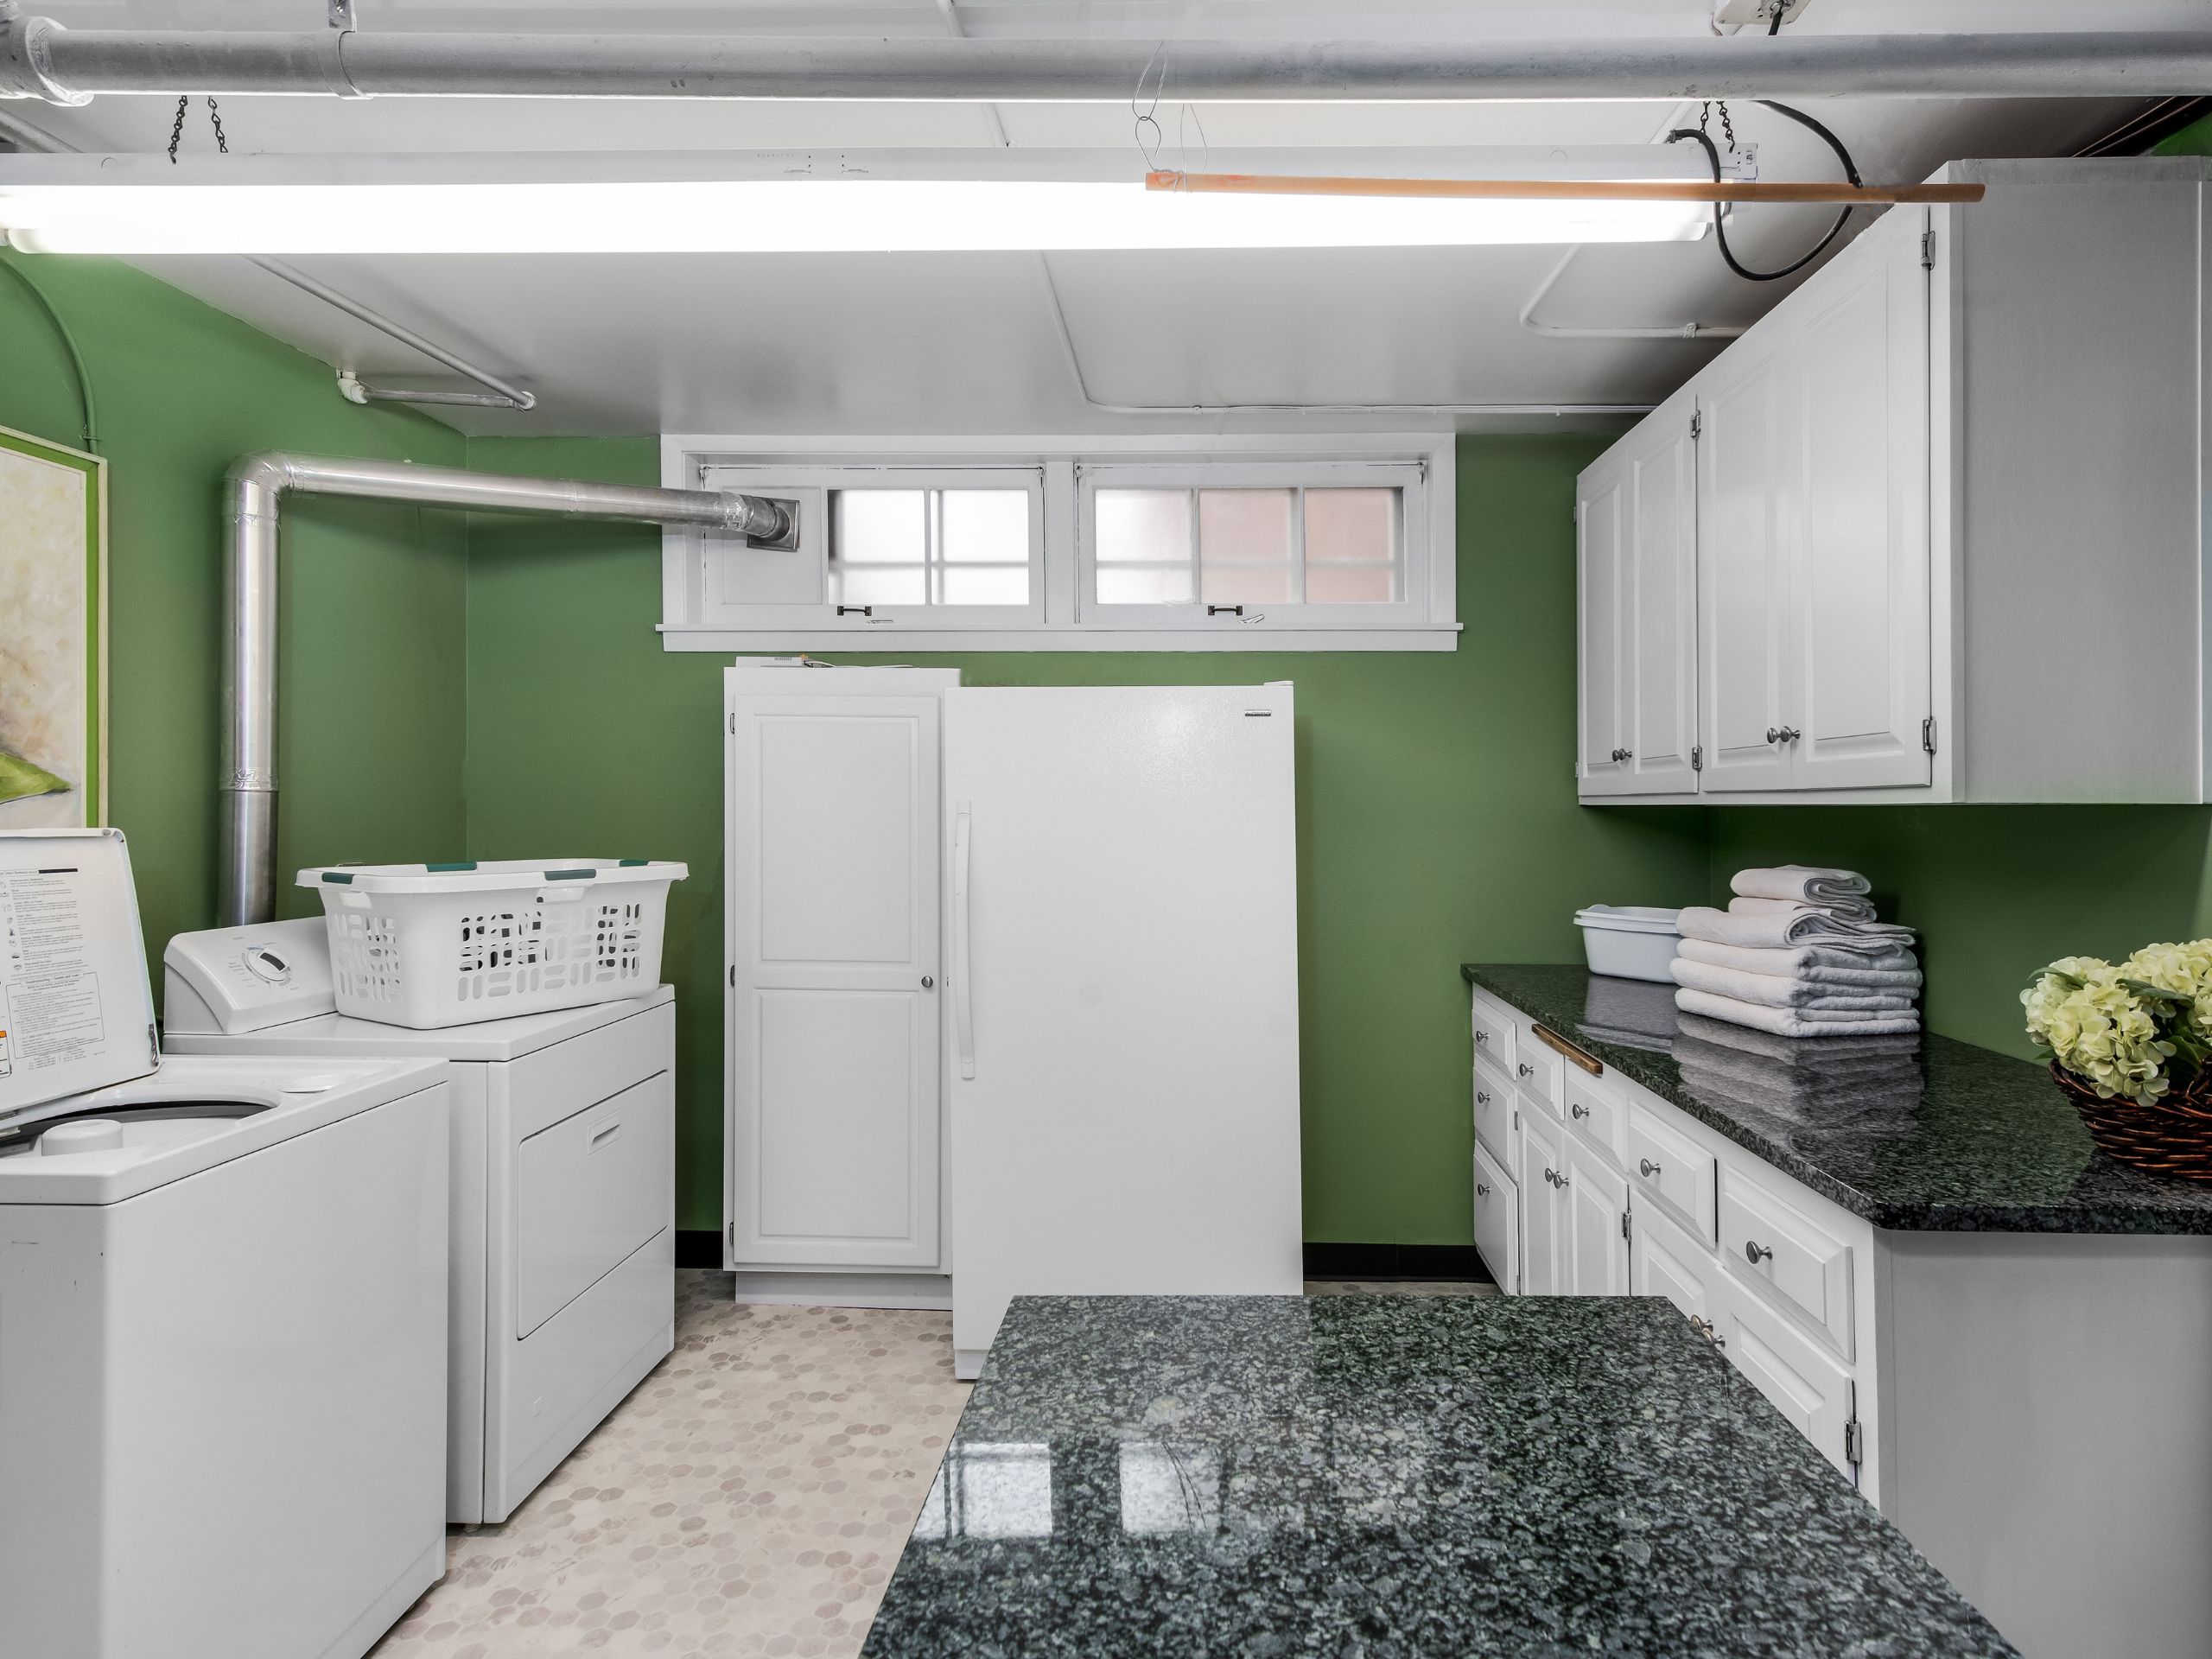 what's the story, basement laundry room, countertops, cabinets, refridgerator